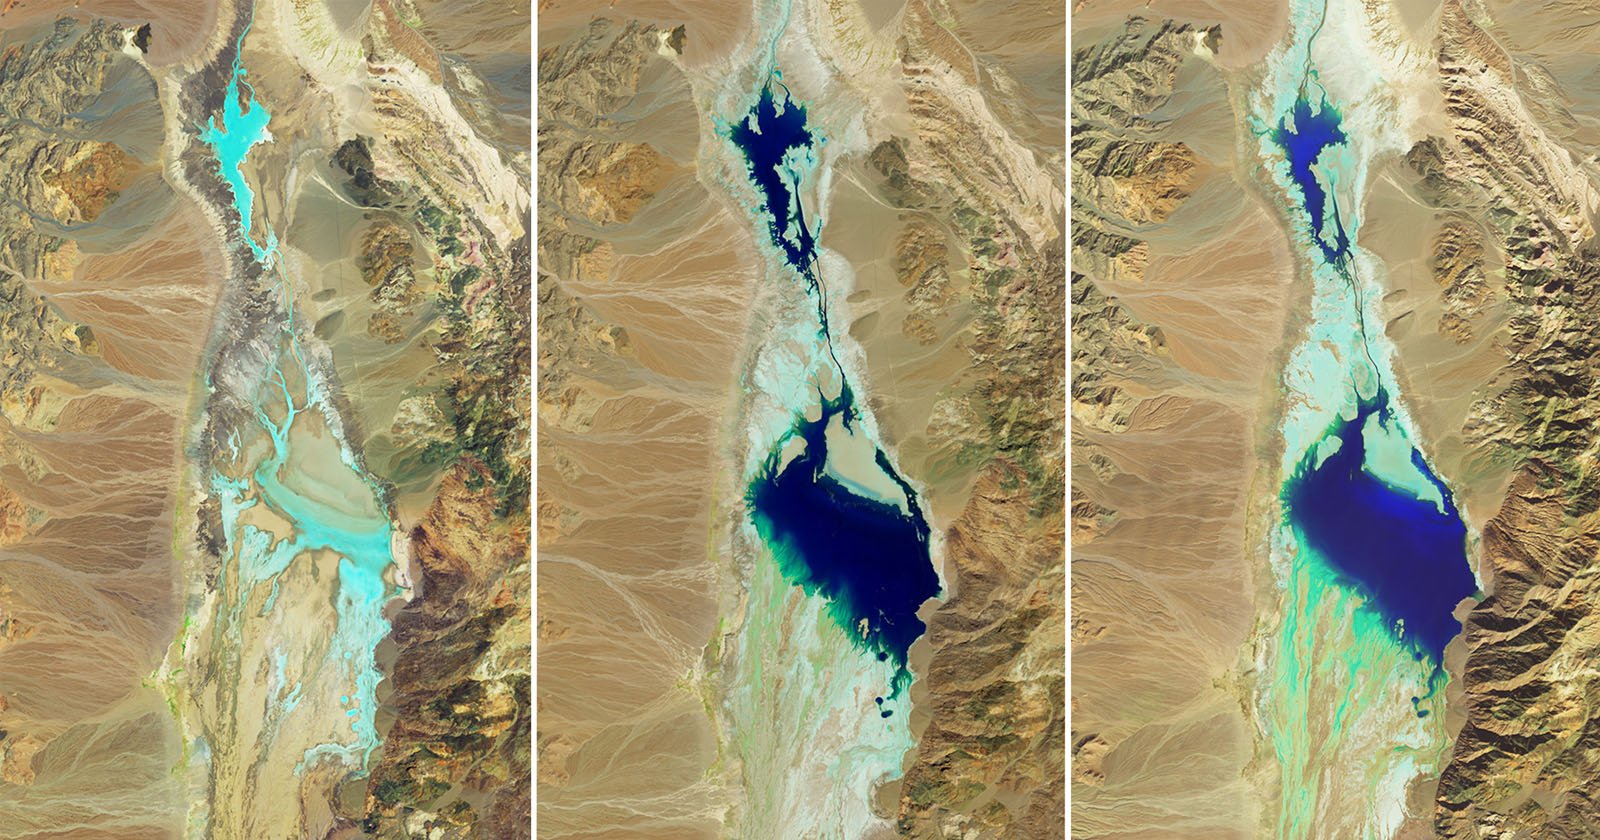 Landsat’s Images Are Vital in the Fight Against Climate Change